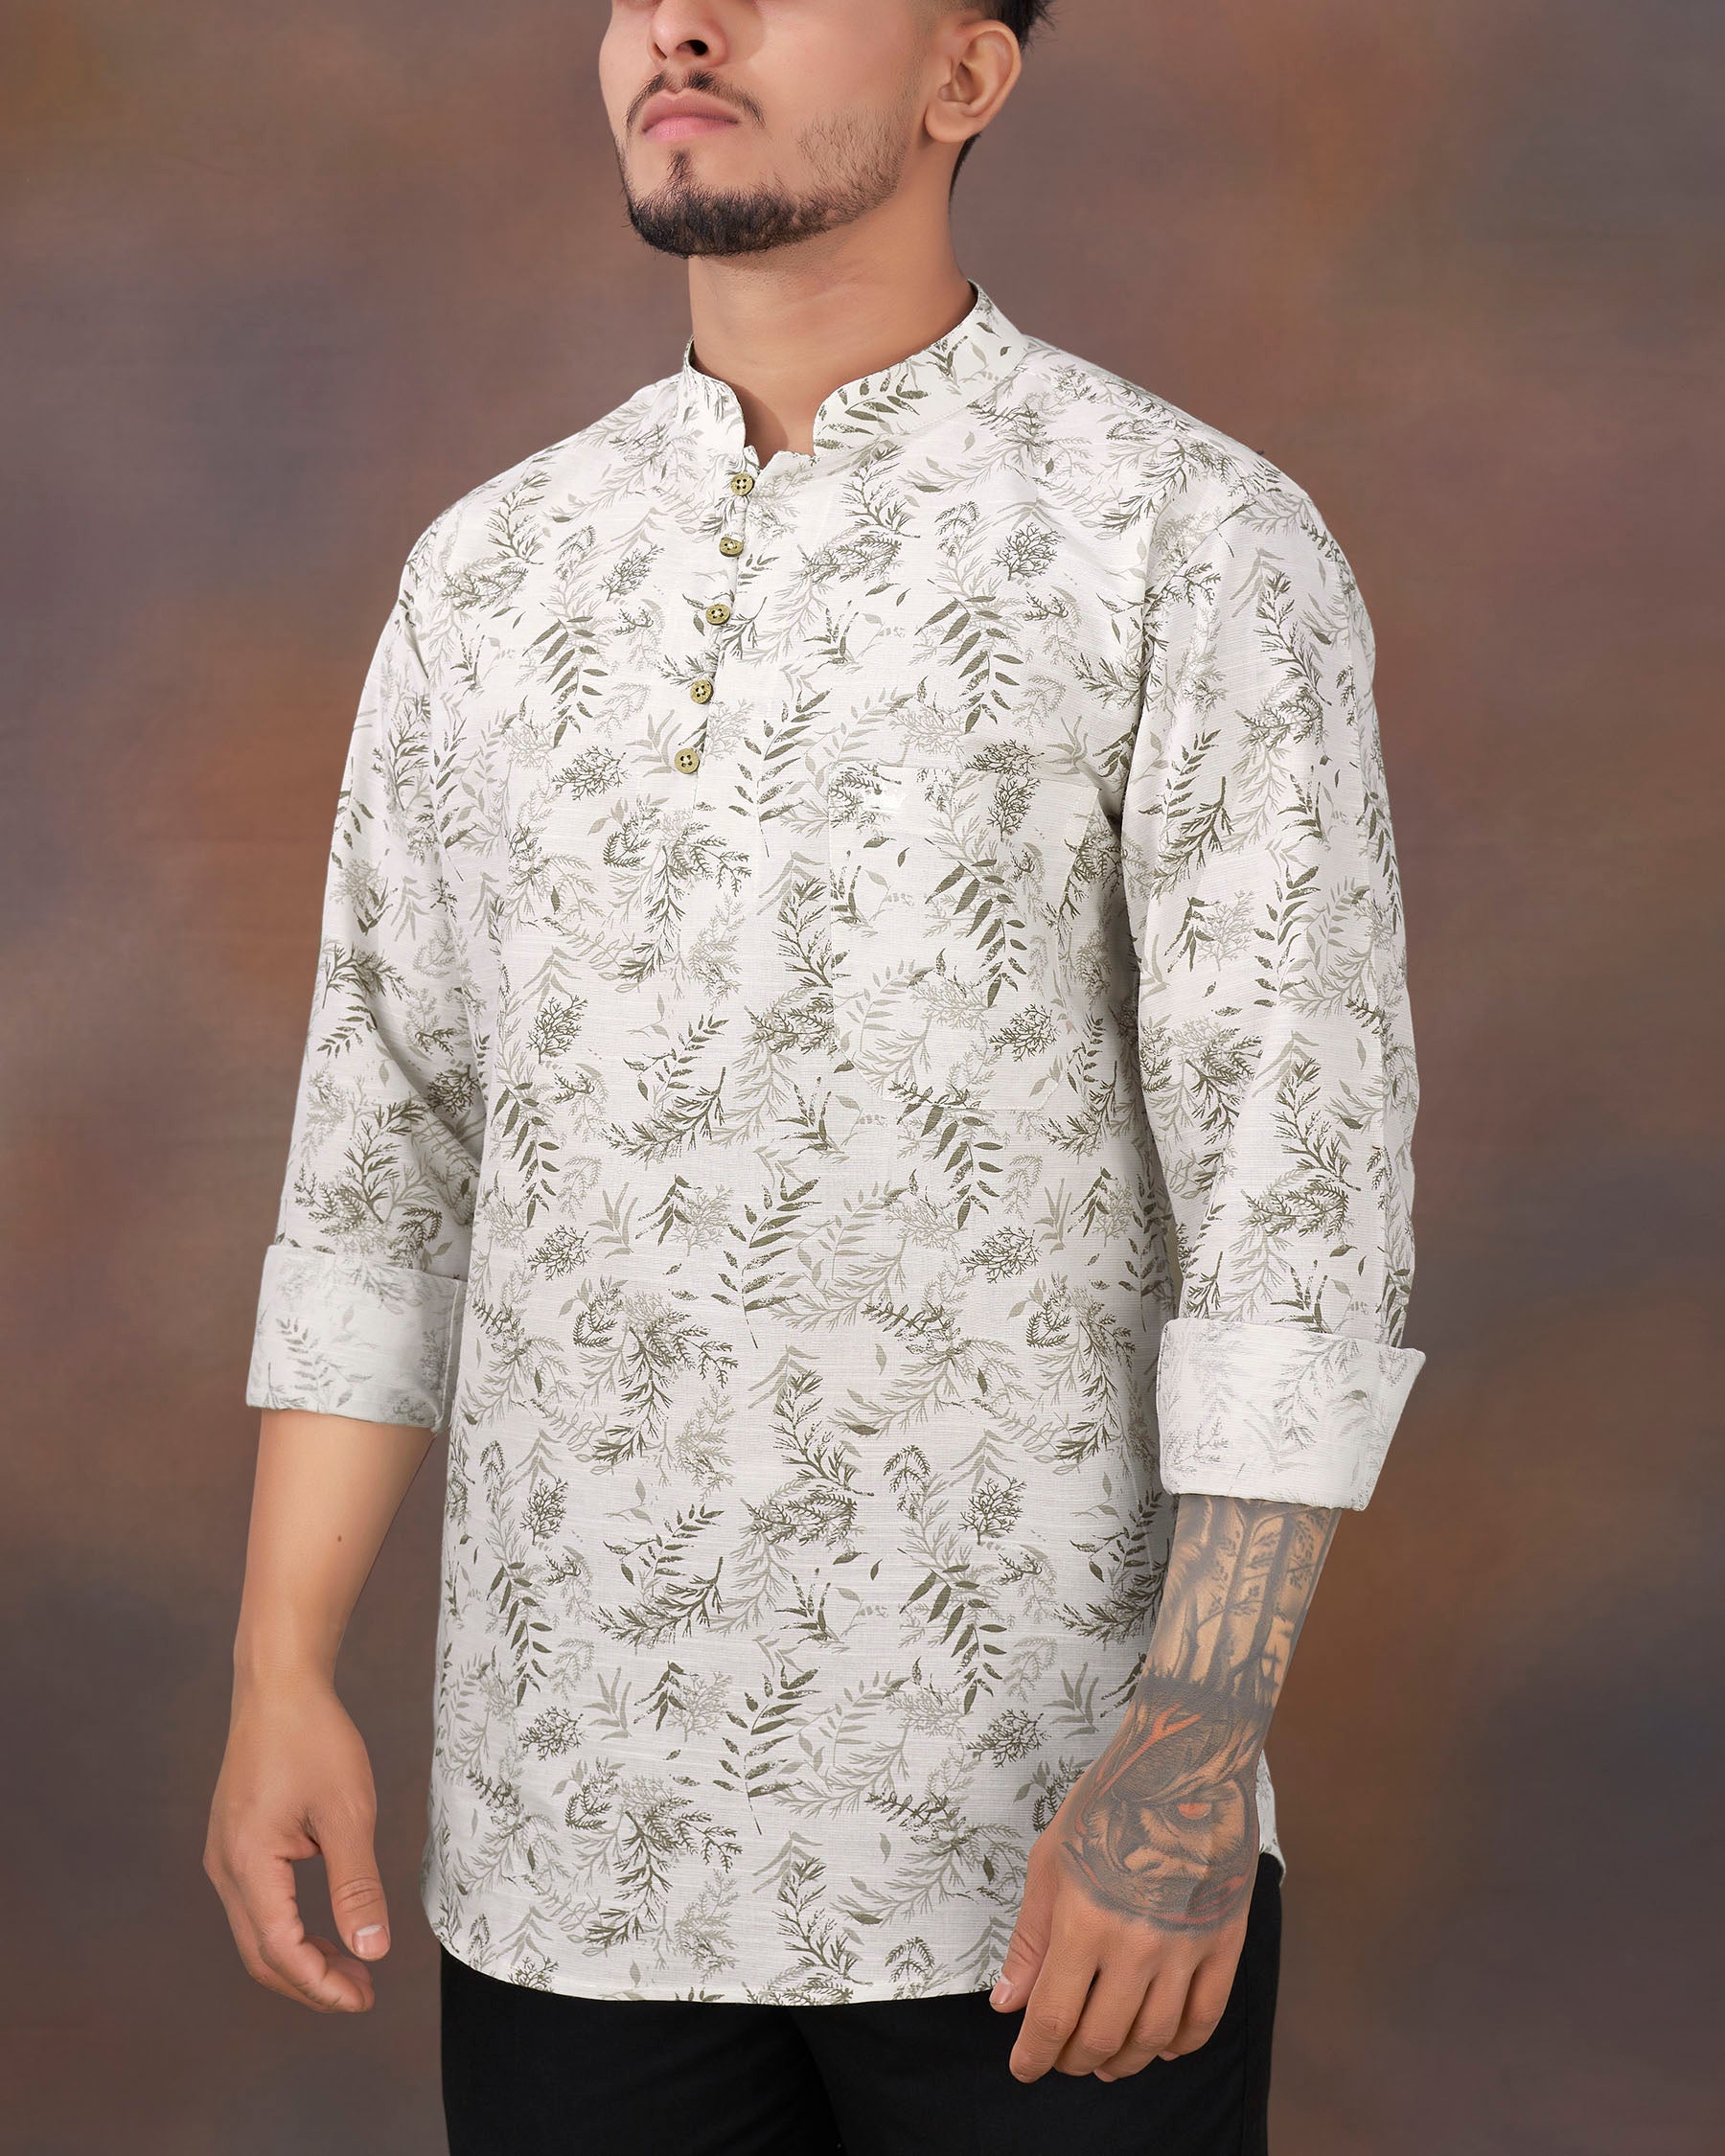 Mercury White with Leaves Printed Luxurious Linen Shirt